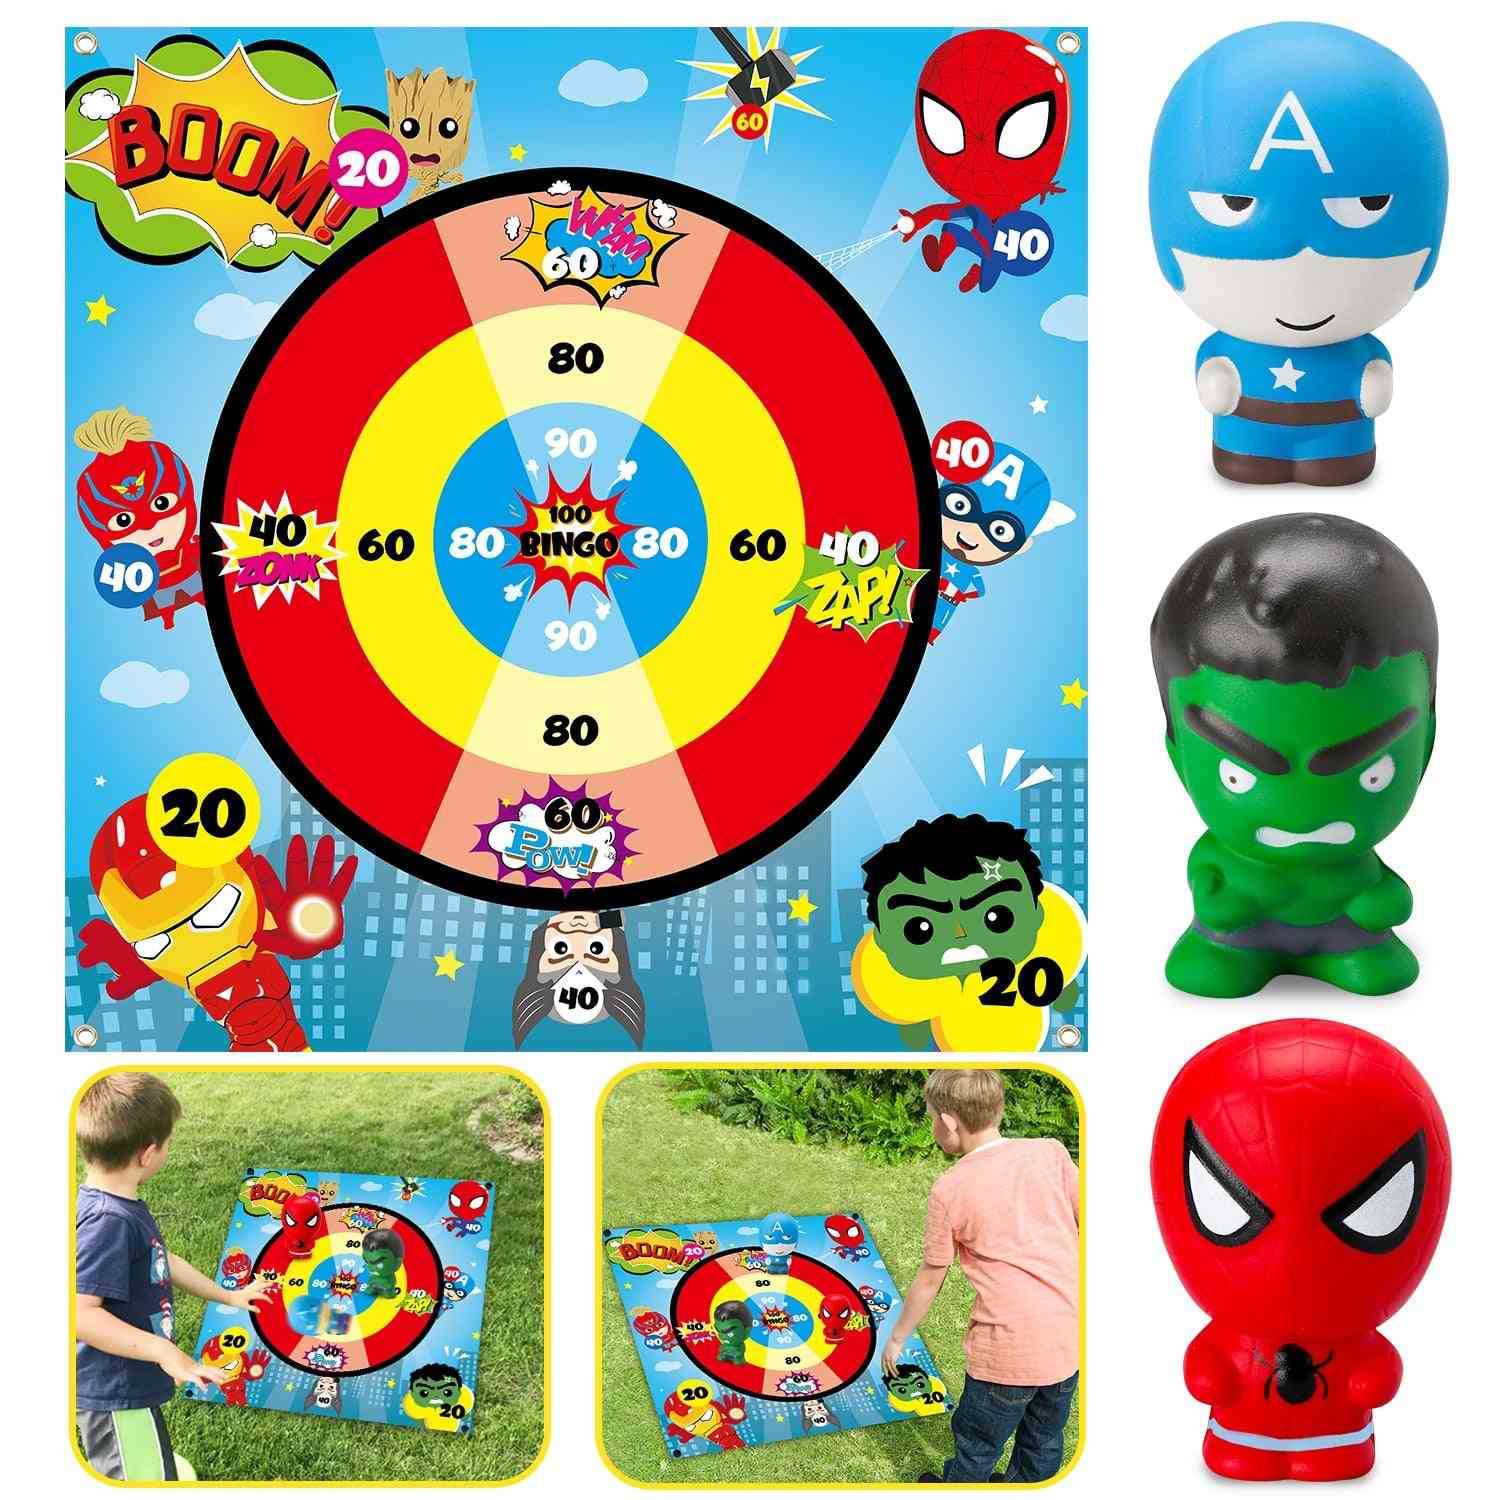 Superhero Flarts Lawn Dart Game Of Safe Version, Throwing Squishies Toy On Fabric Score Mat, Indoor Or Outdoor Yard Game For Kids